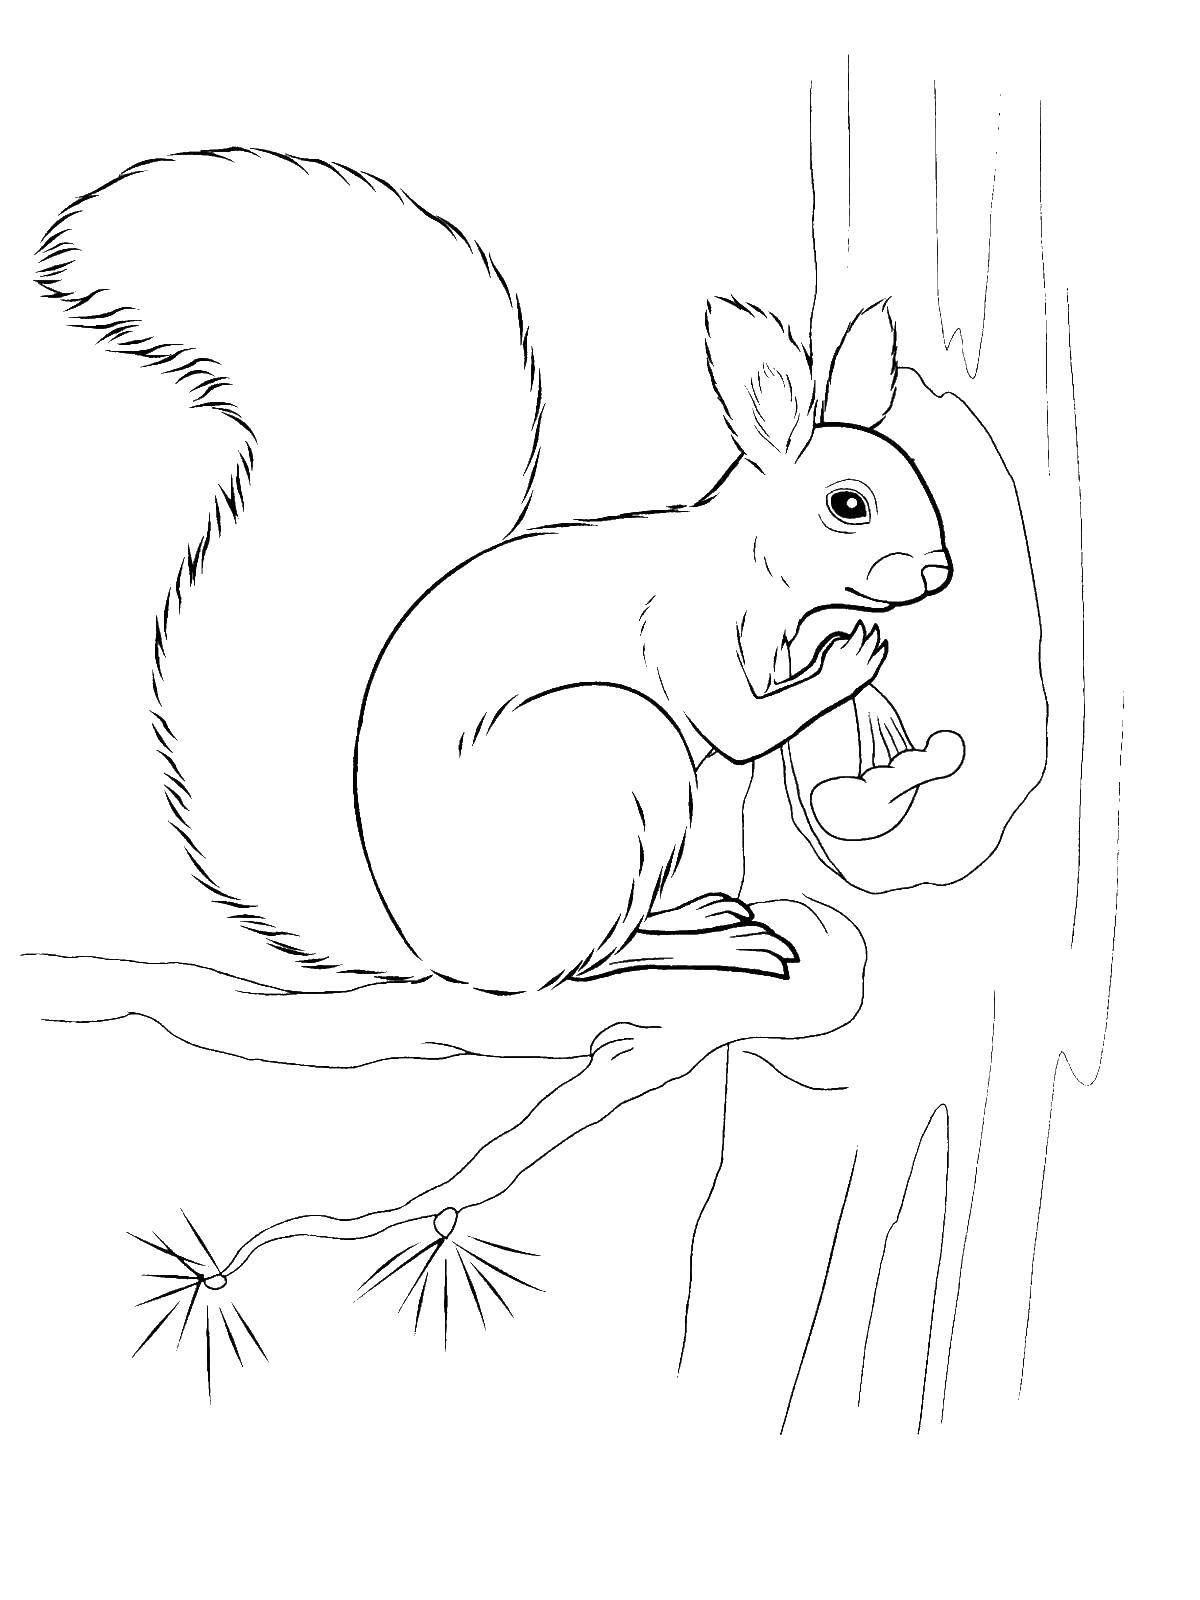 Coloring Squirrel gathers mushrooms. Category wild animals. Tags:  protein .